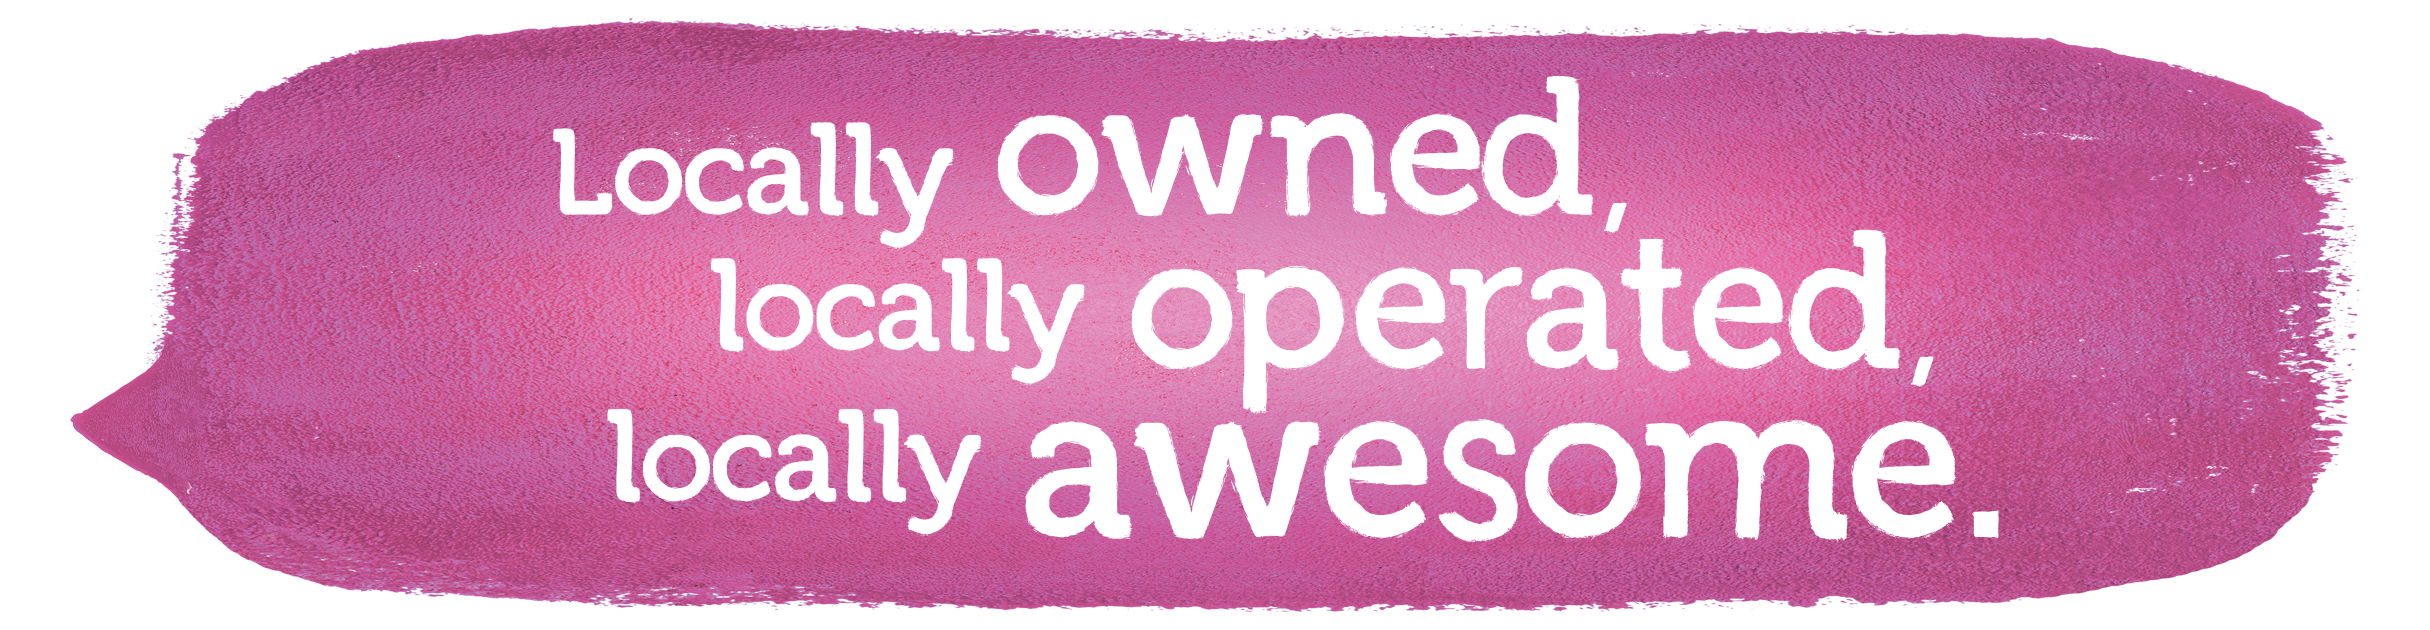 Locally owned, locally operated, locally awesome.